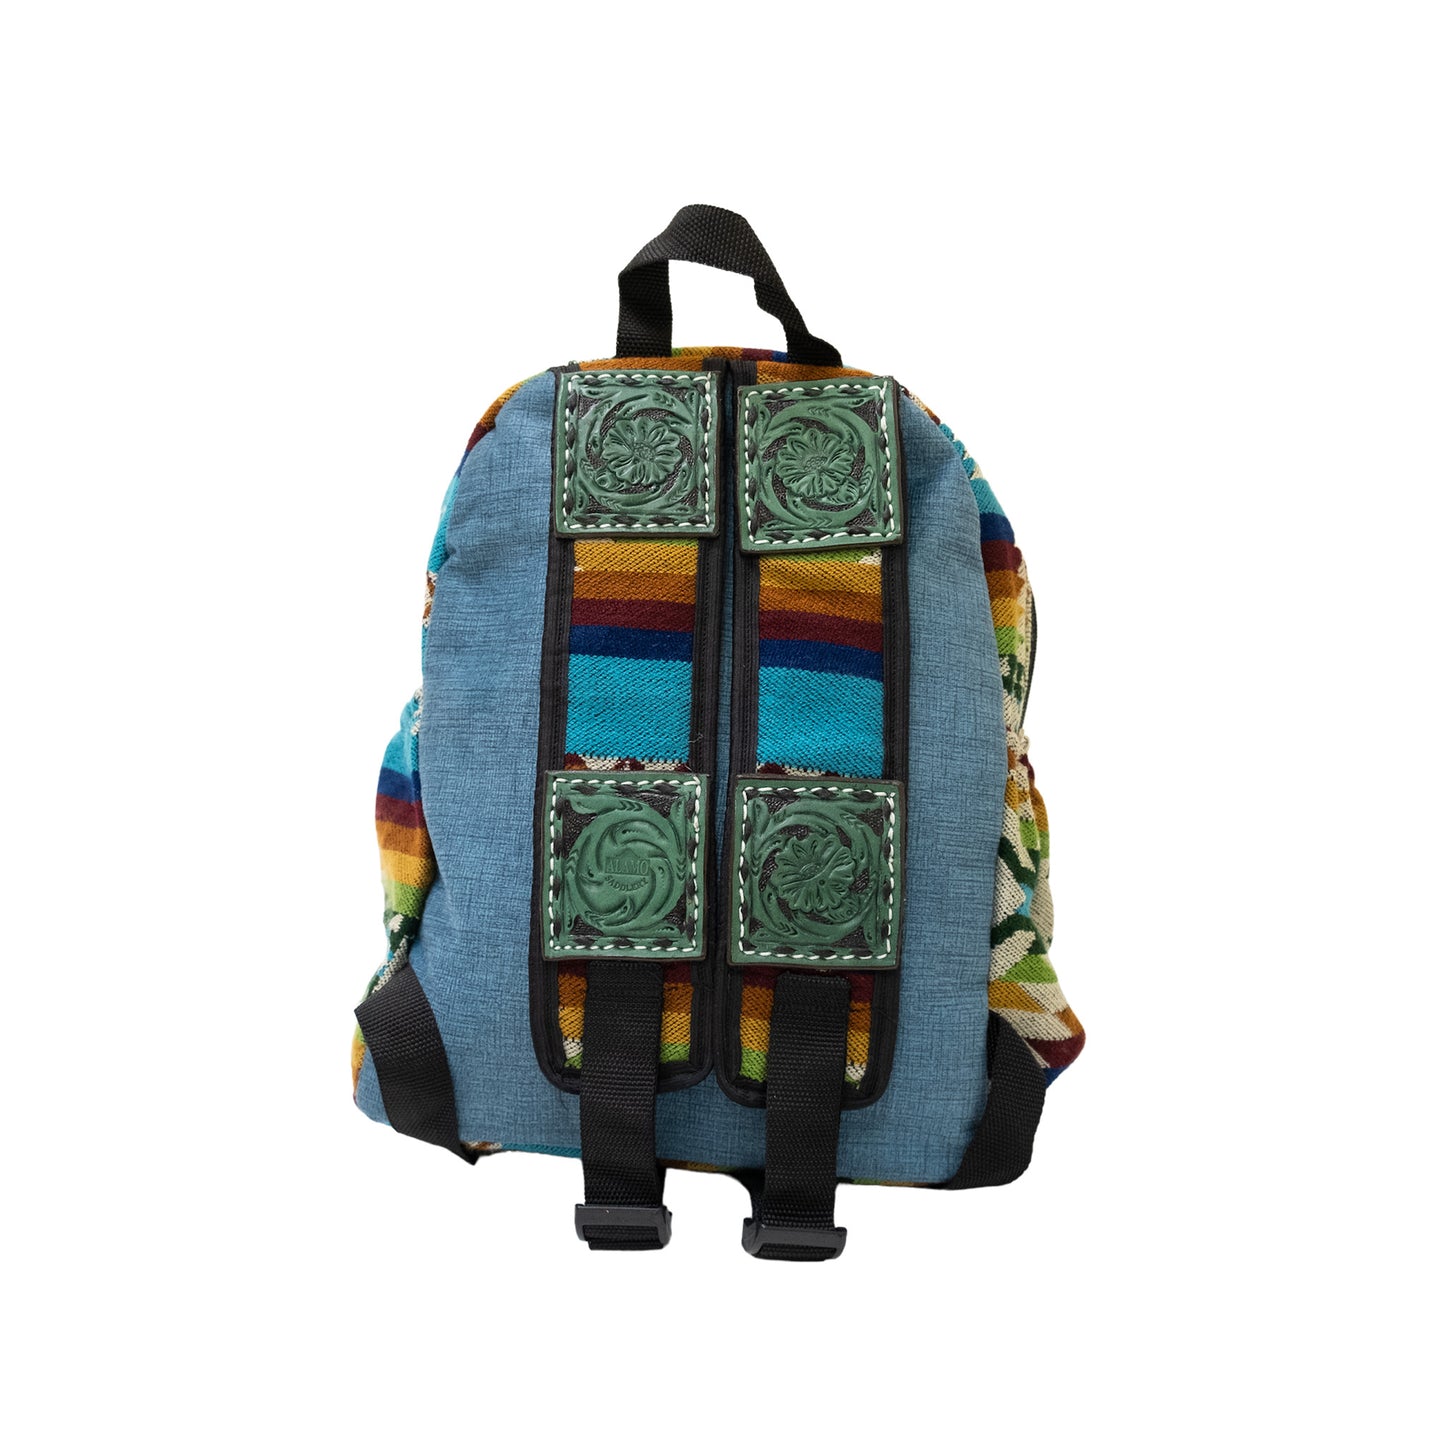 Mini backpack turquiose leather patch AA tooling with buckstitch and background paint